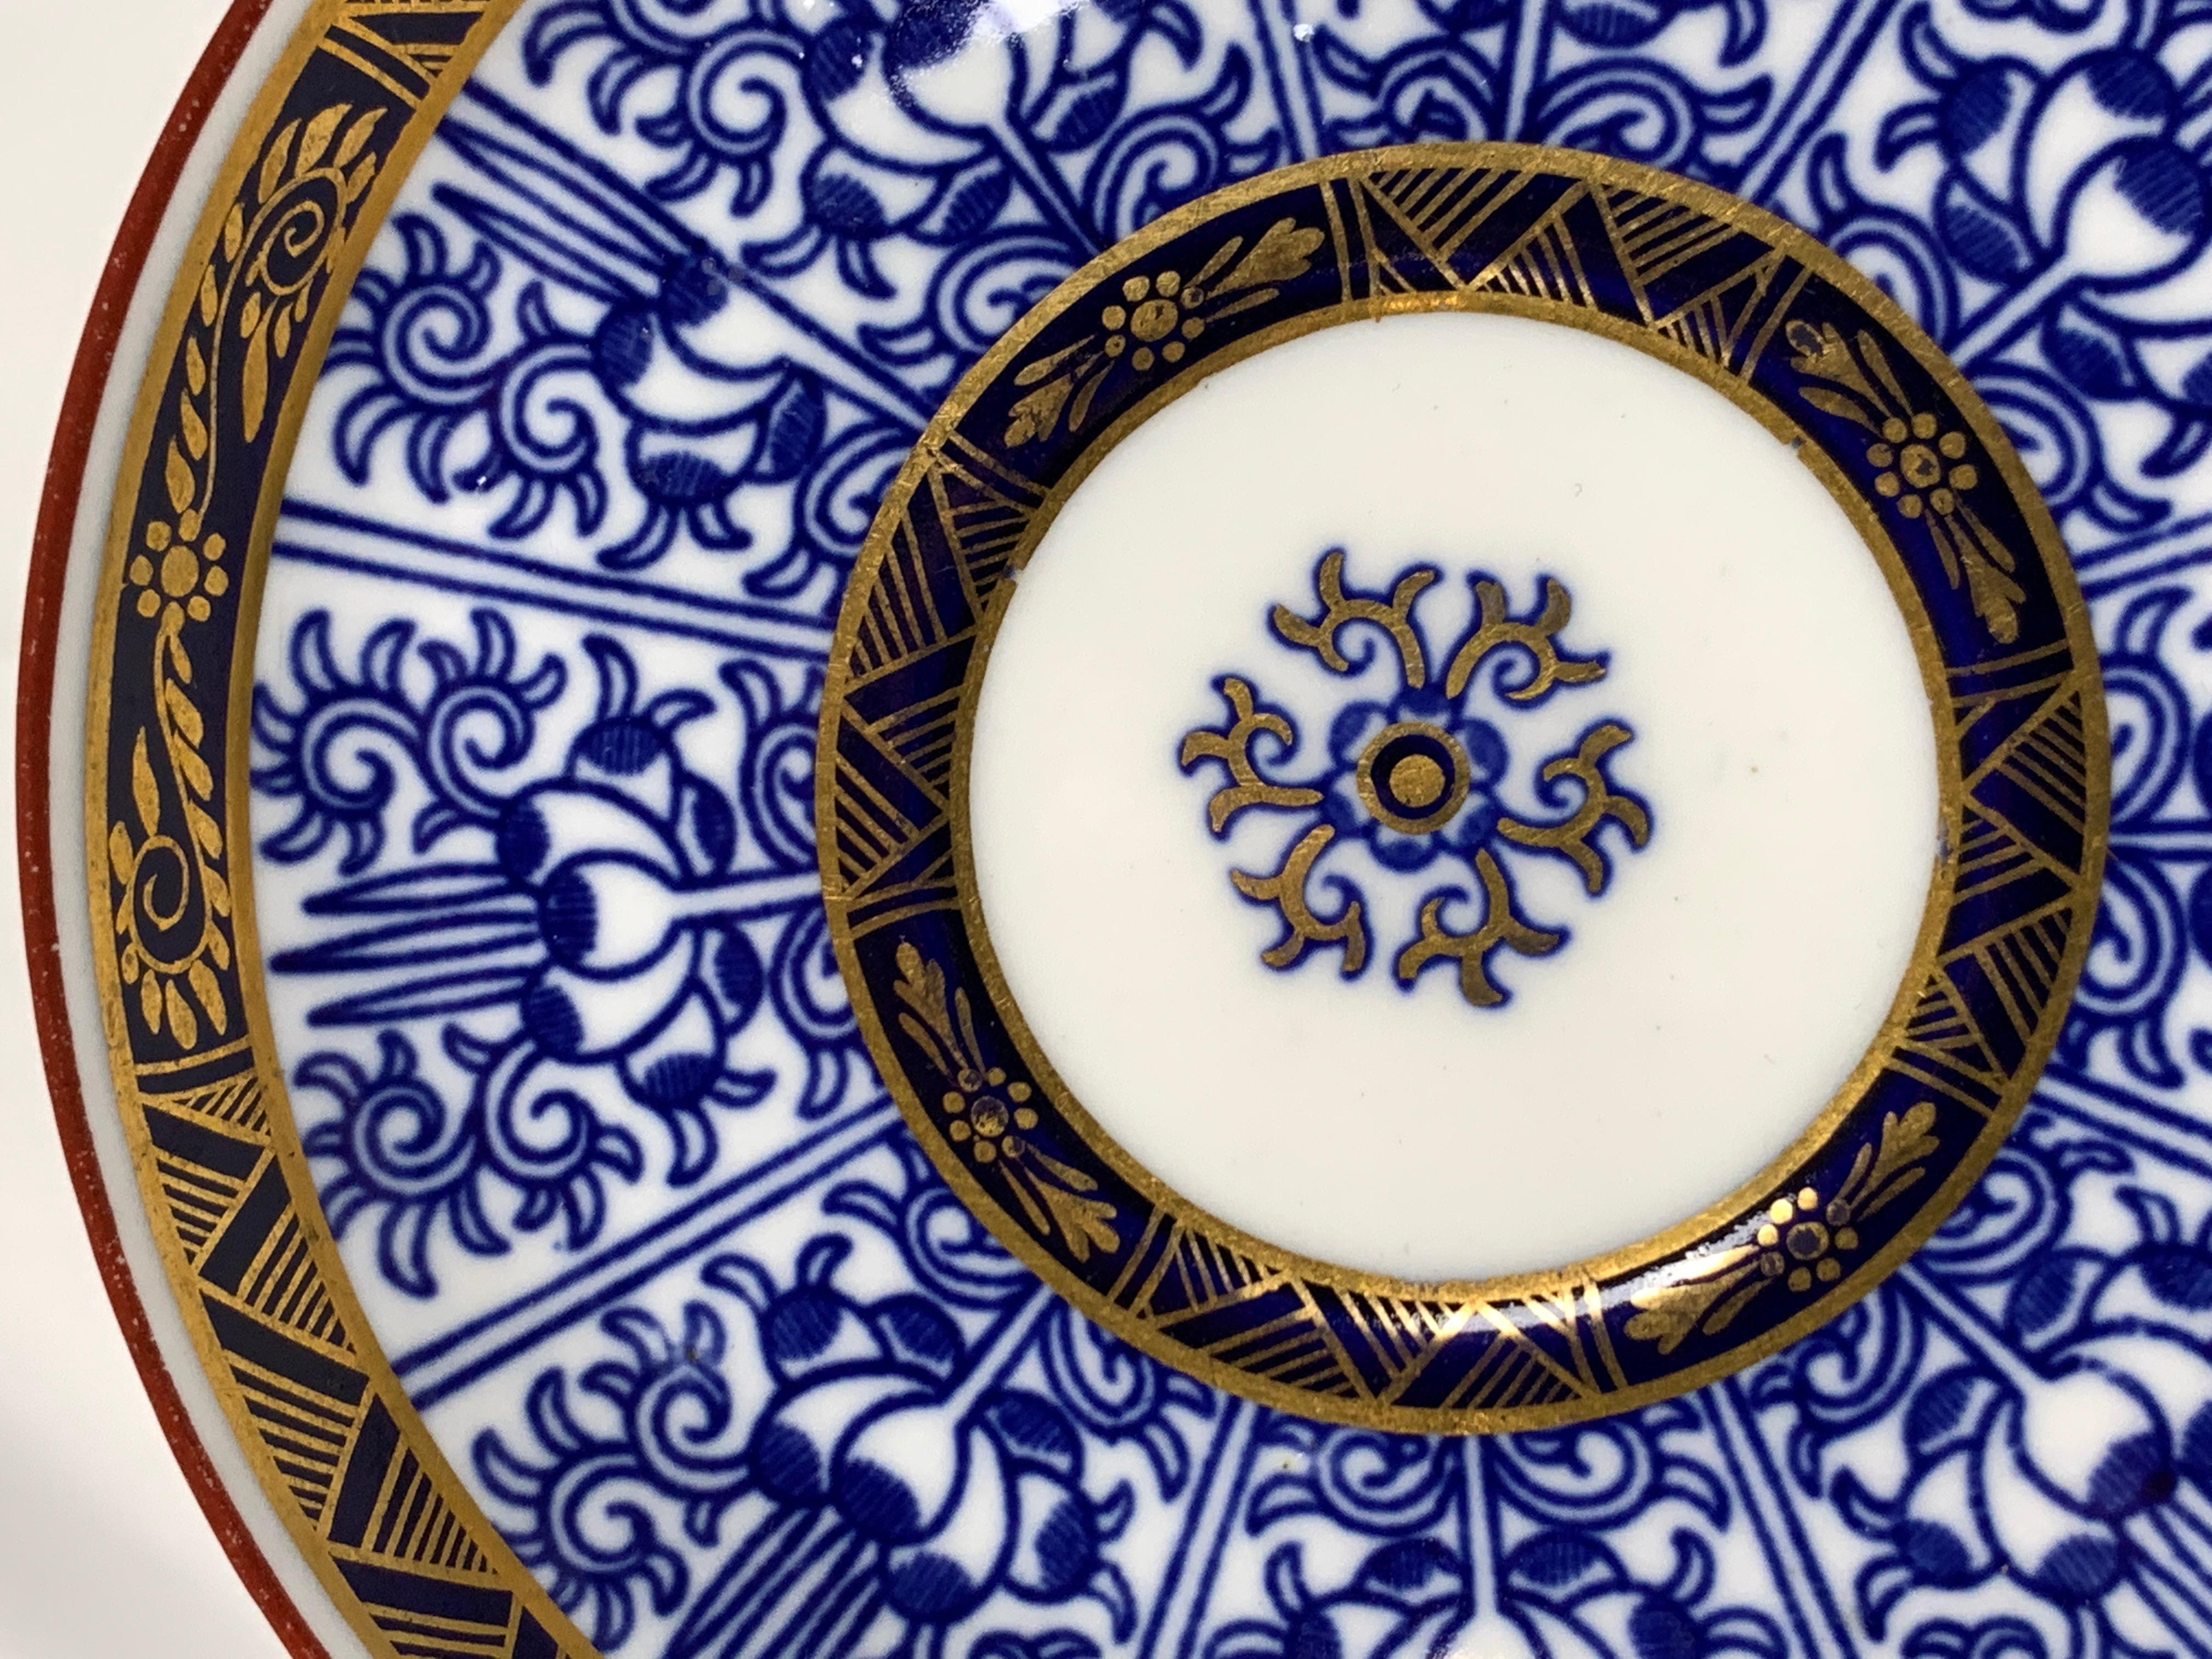 19th Century Demitasse Blue and White Porcelain Cups and Saucers in the Royal Lily Pattern